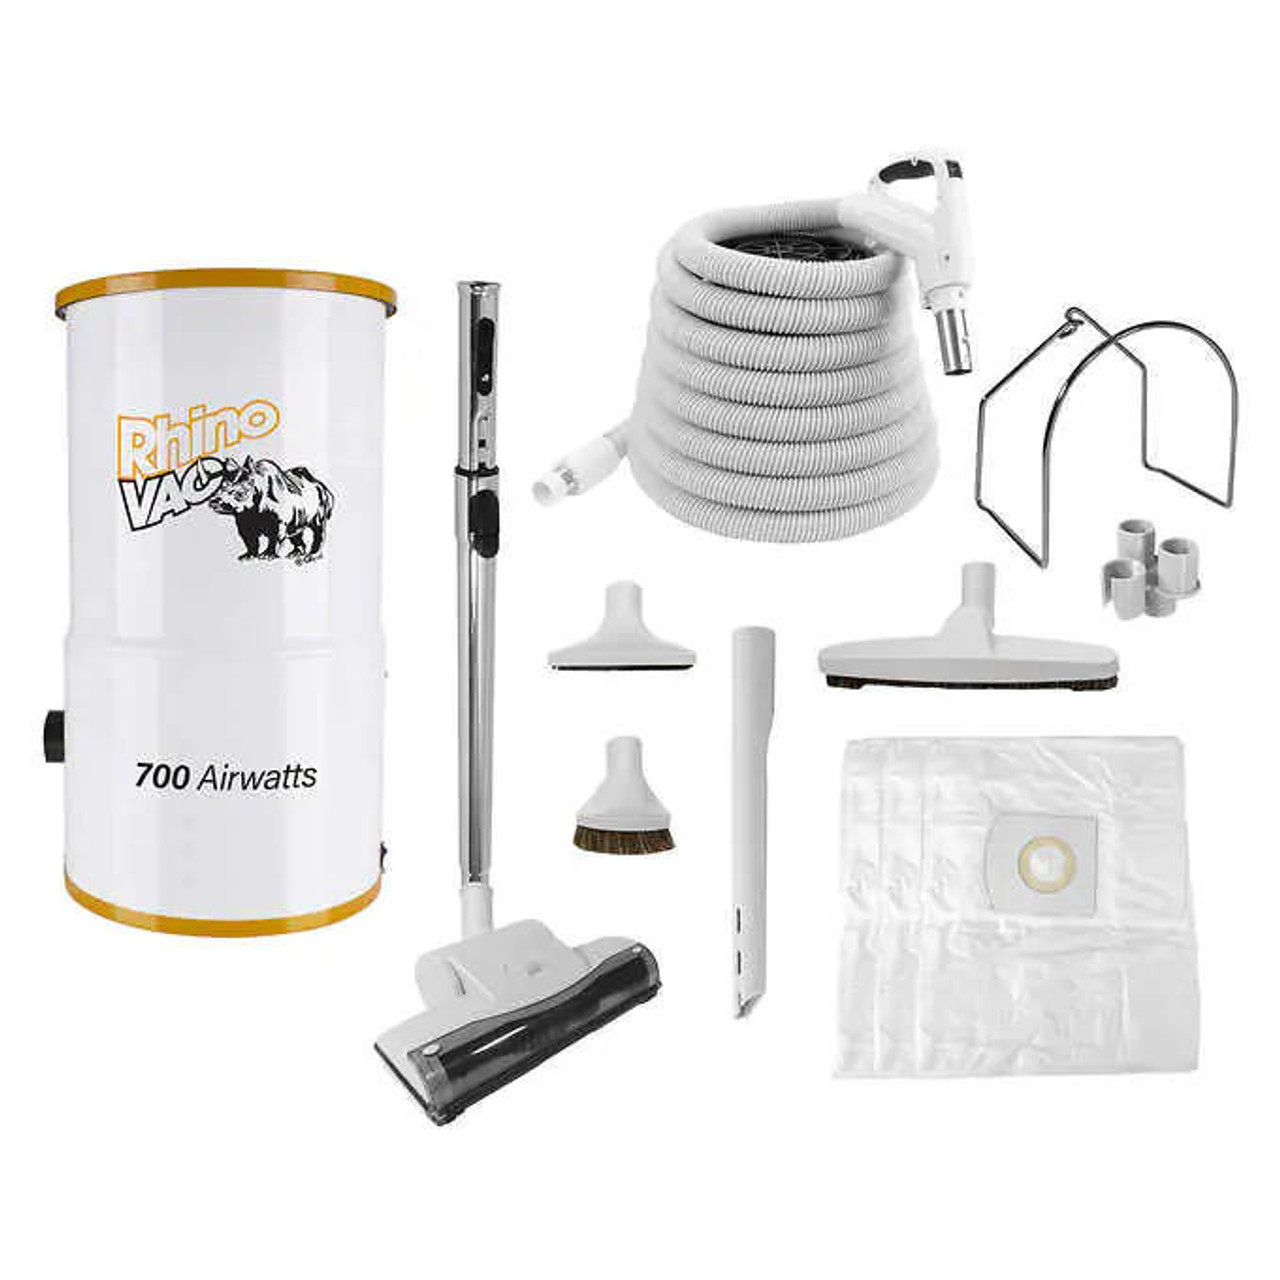 Rhinovac Central Vacuum Air Nozzle with Accessories - 700 Airwatts of Cleaning Excellence- Chicken Pieces